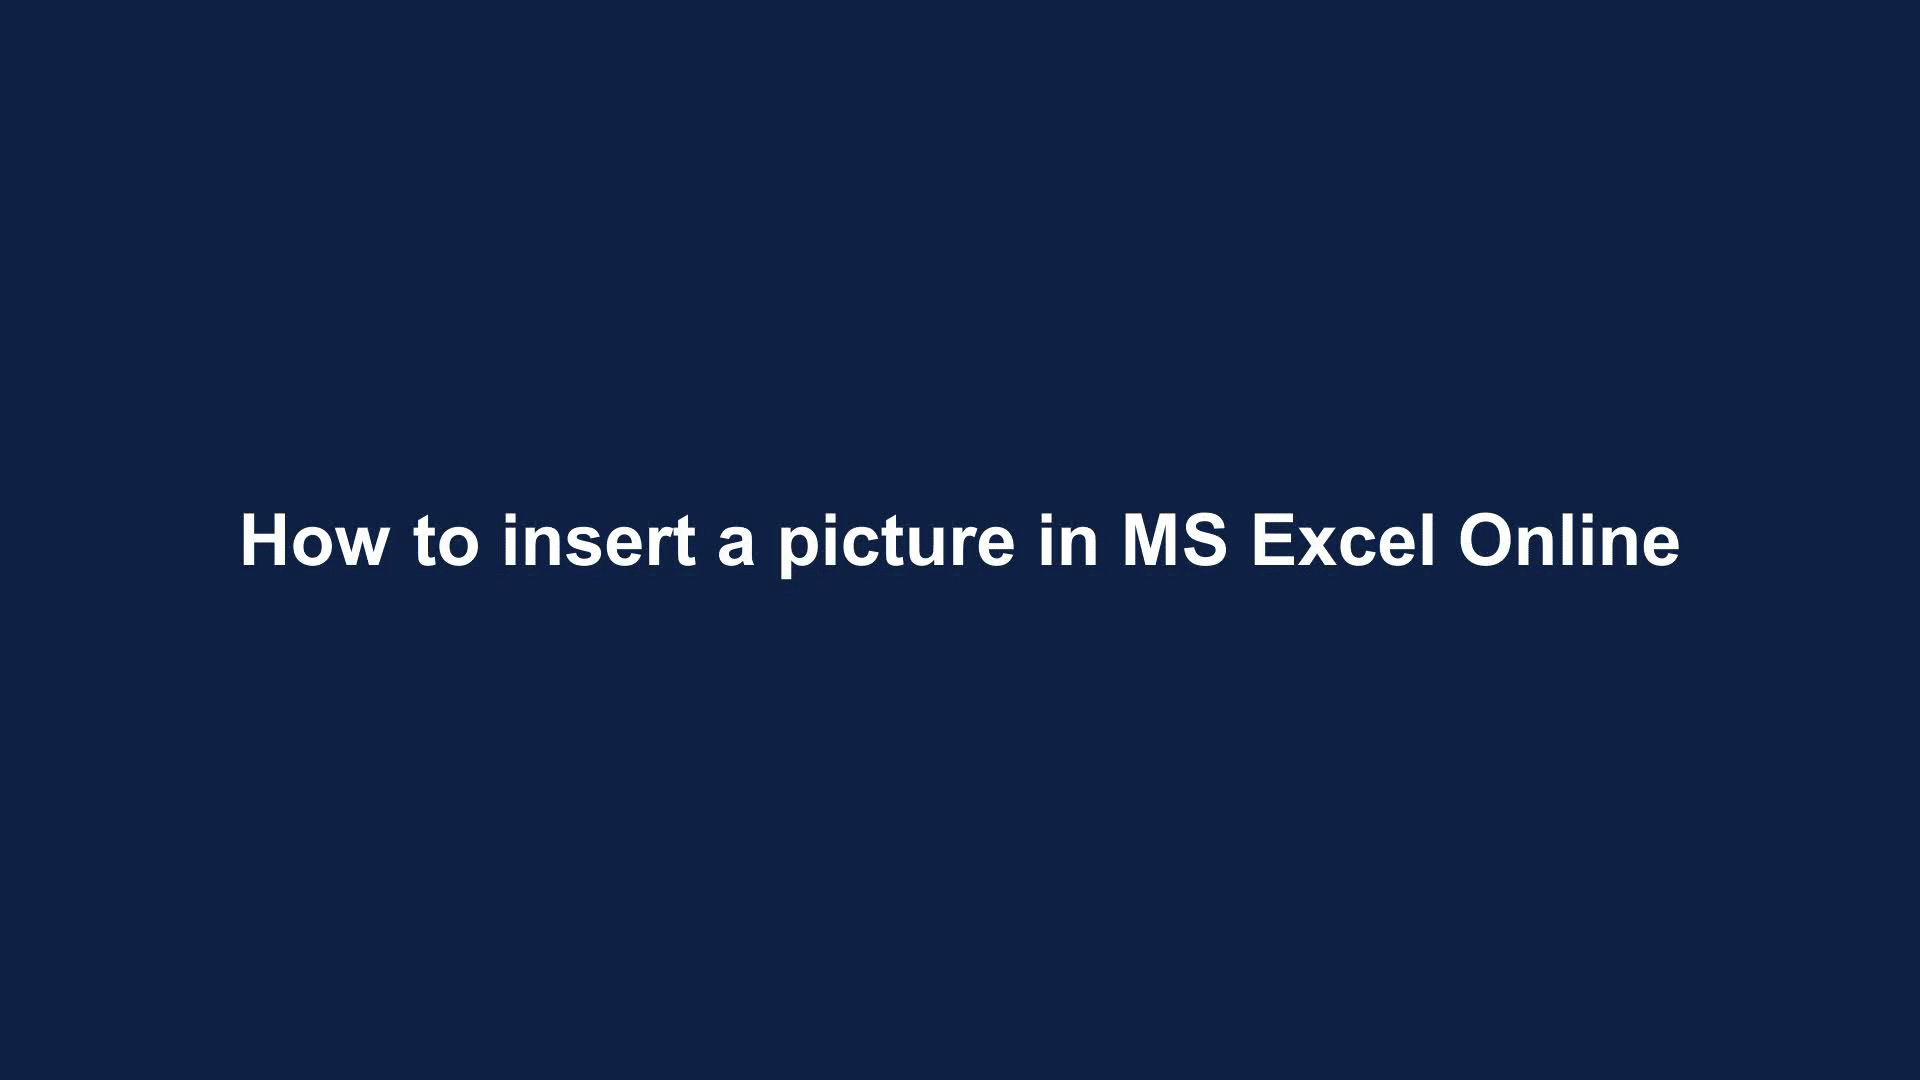 How To Insert Image In Ms Excel Mageusi Images 6126